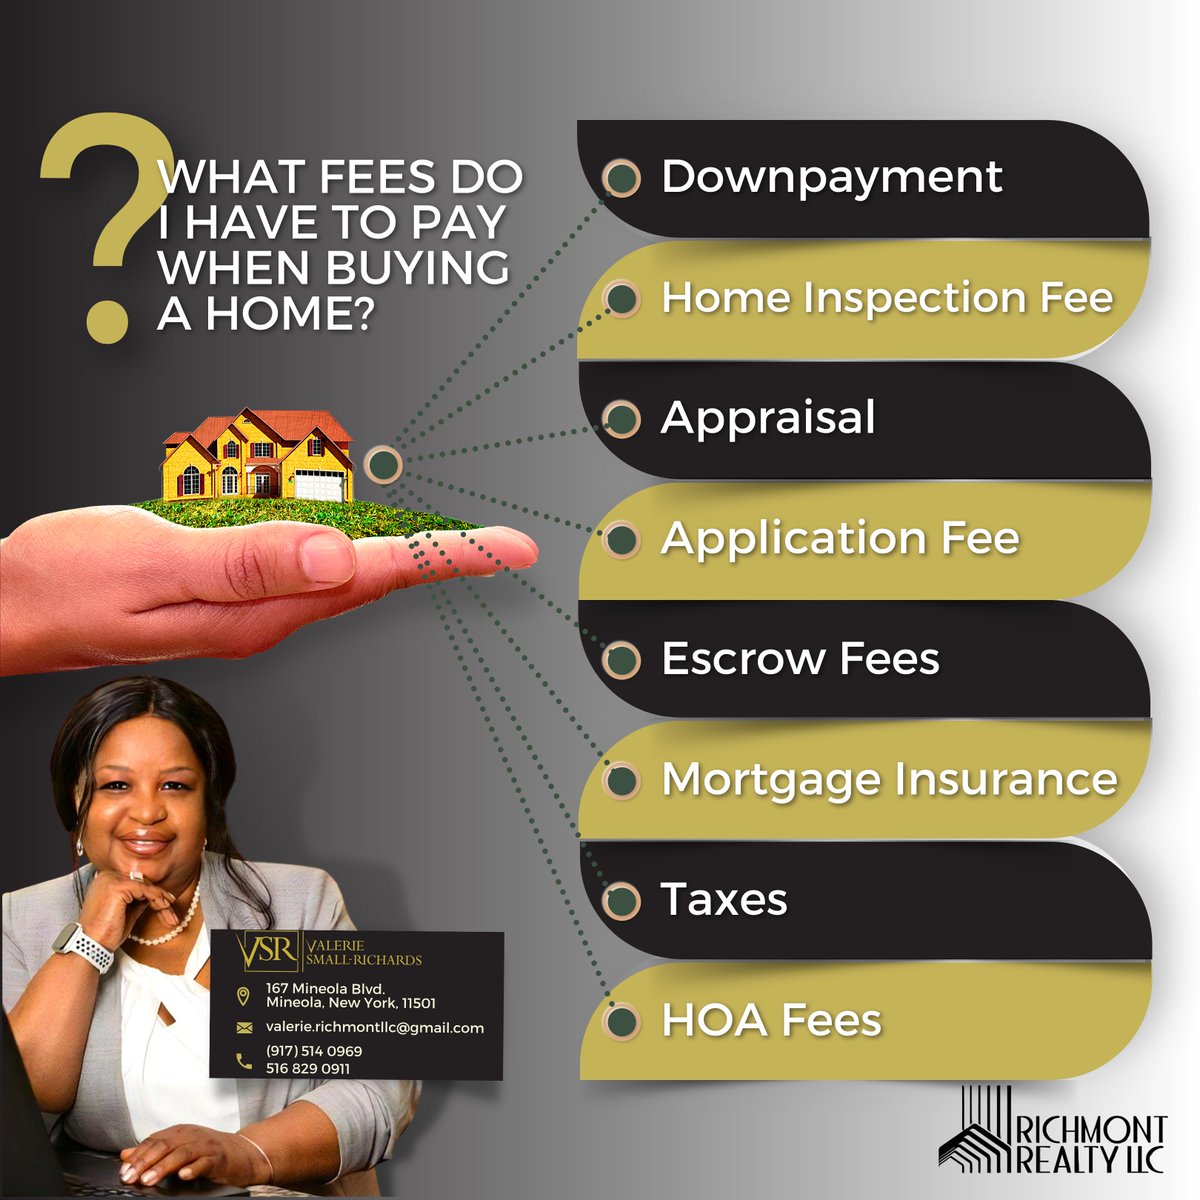 Looking for a new home but have Questions about what fees are required. 

I'm always just one call away so please feel free to reach out!!!!
 
Continuing to keep you informed and connected…….
.
.
.
#fairhousing2023 #FairHousingForAll